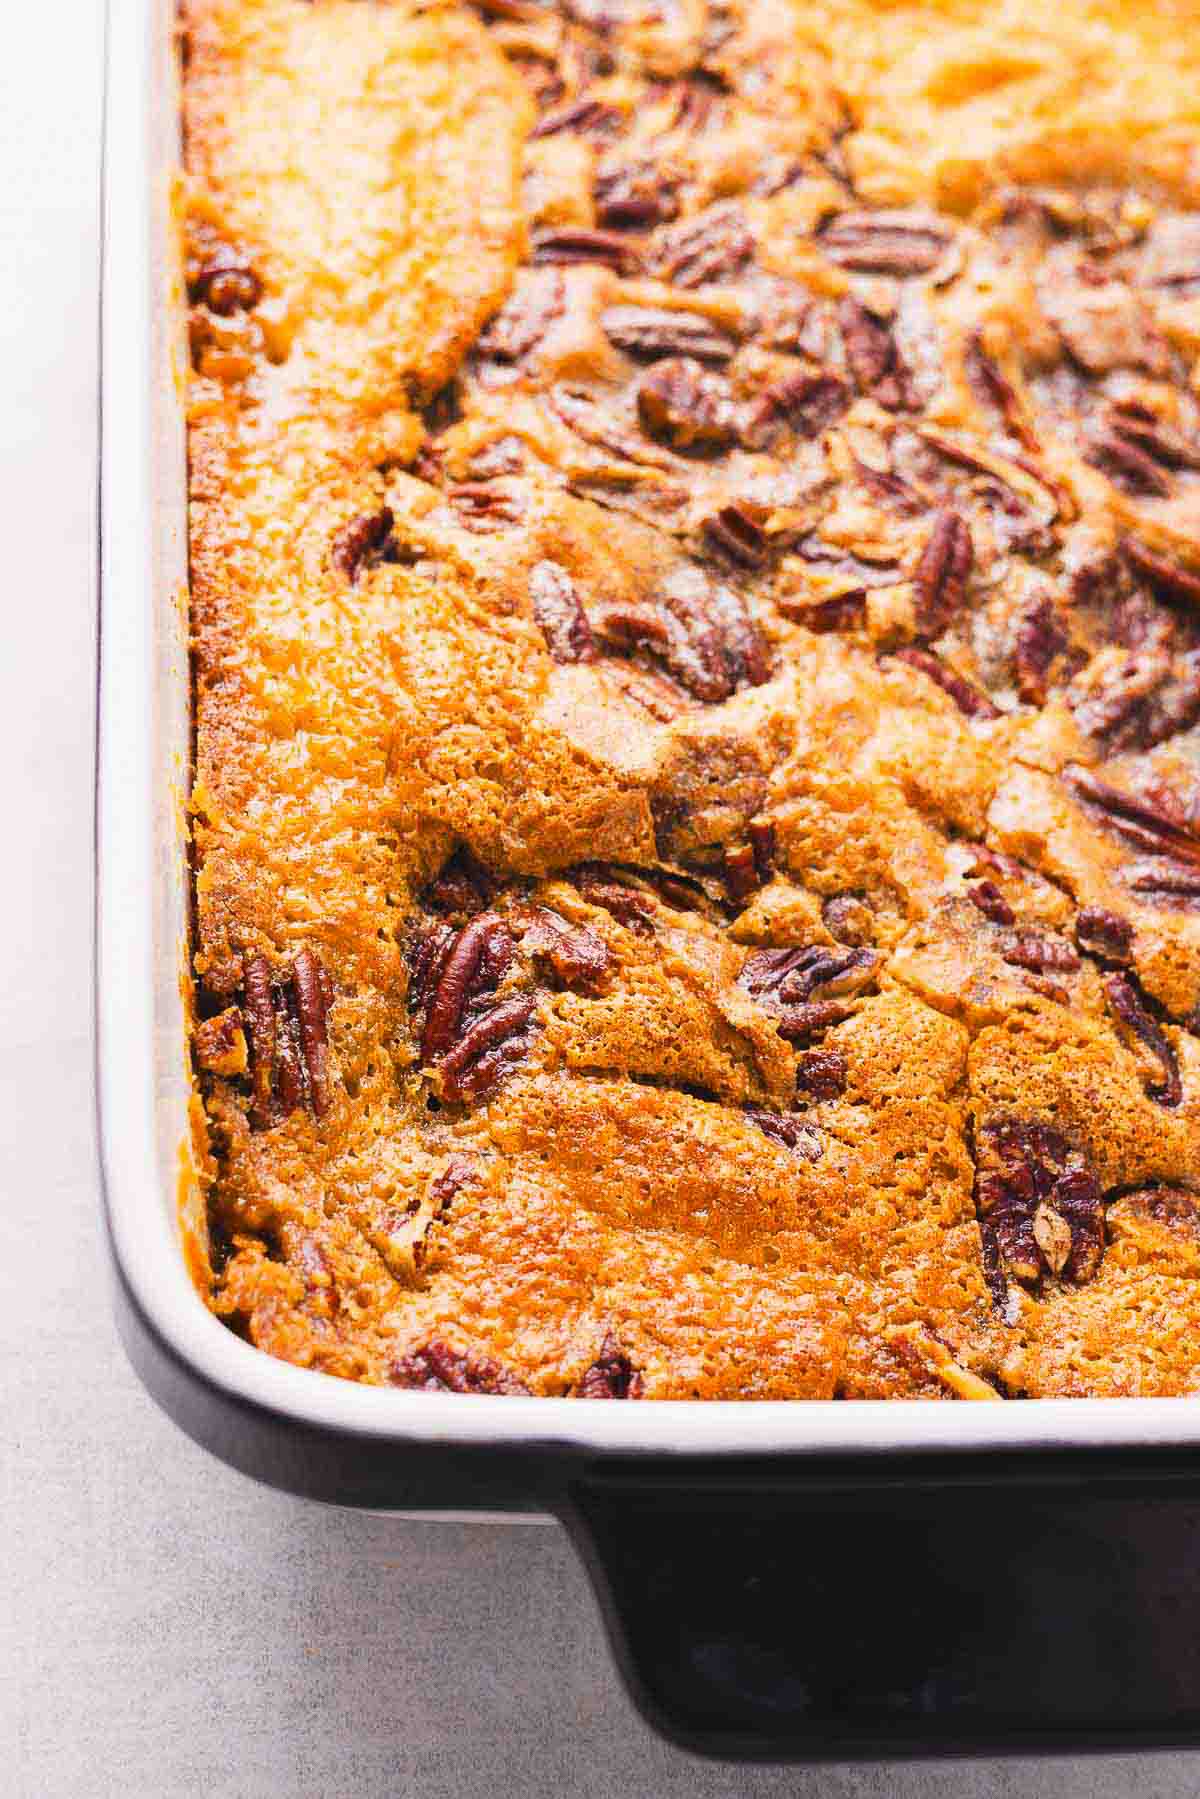 A baking dish with a pecan cobbler in it.